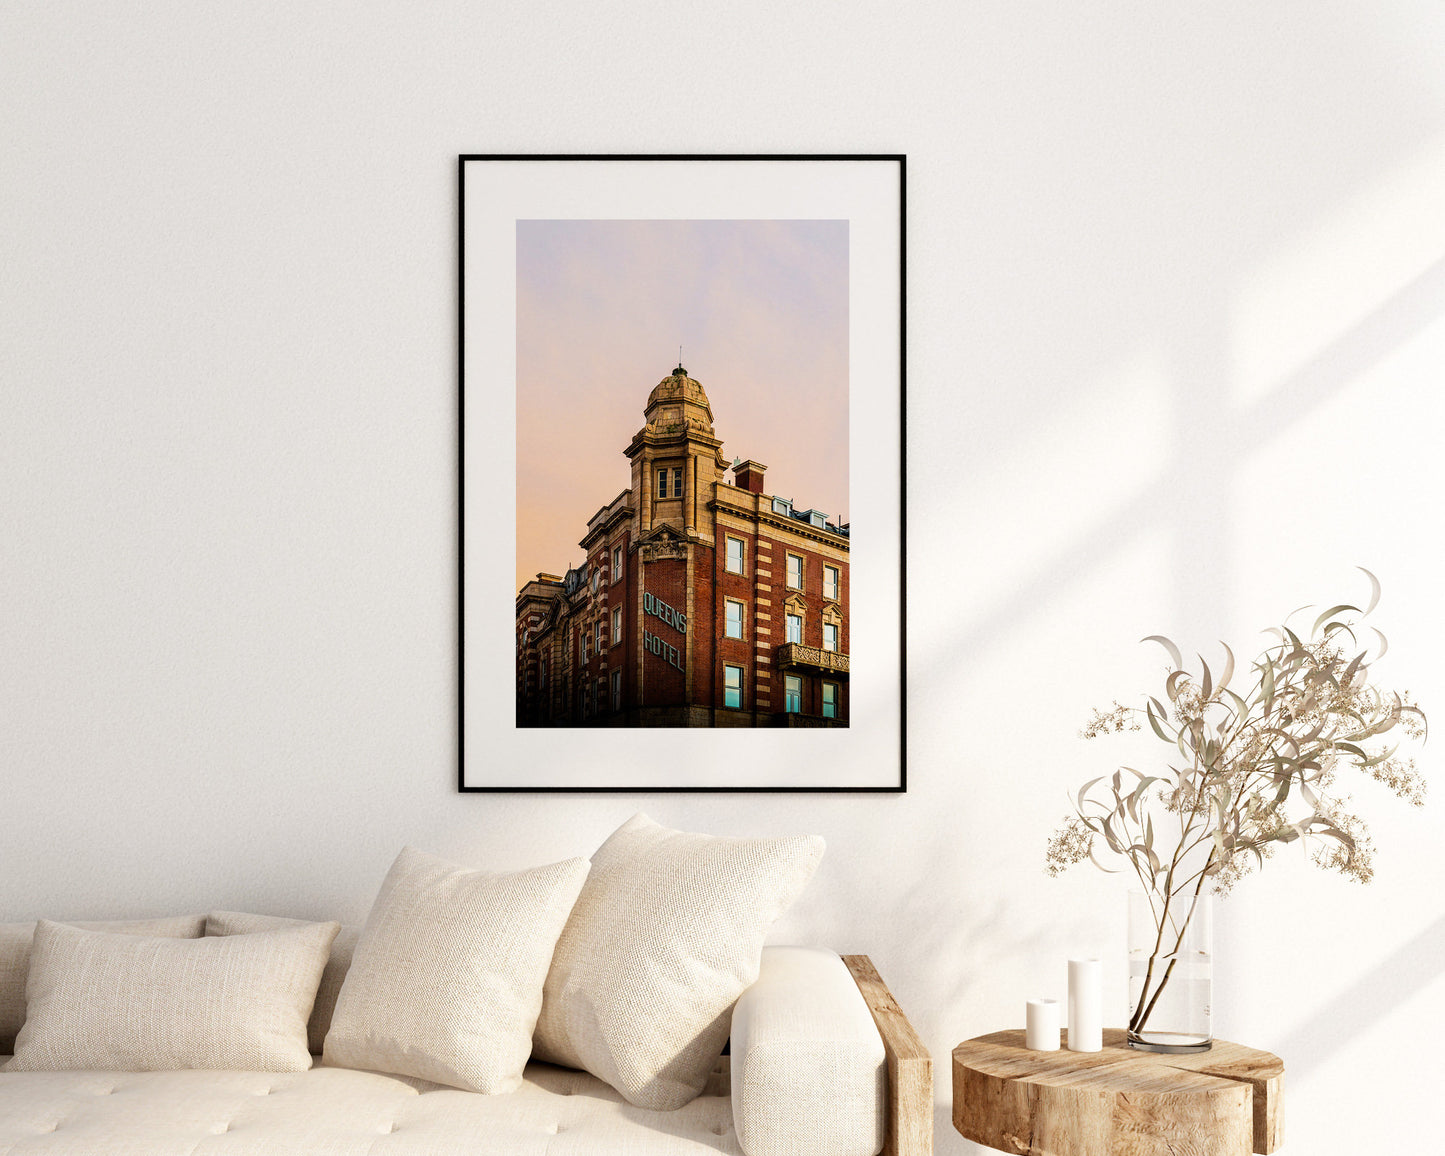 Queens - Photography Print - Portsmouth and Southsea Prints - Wall Art -  Frame and Canvas Options - Portrait